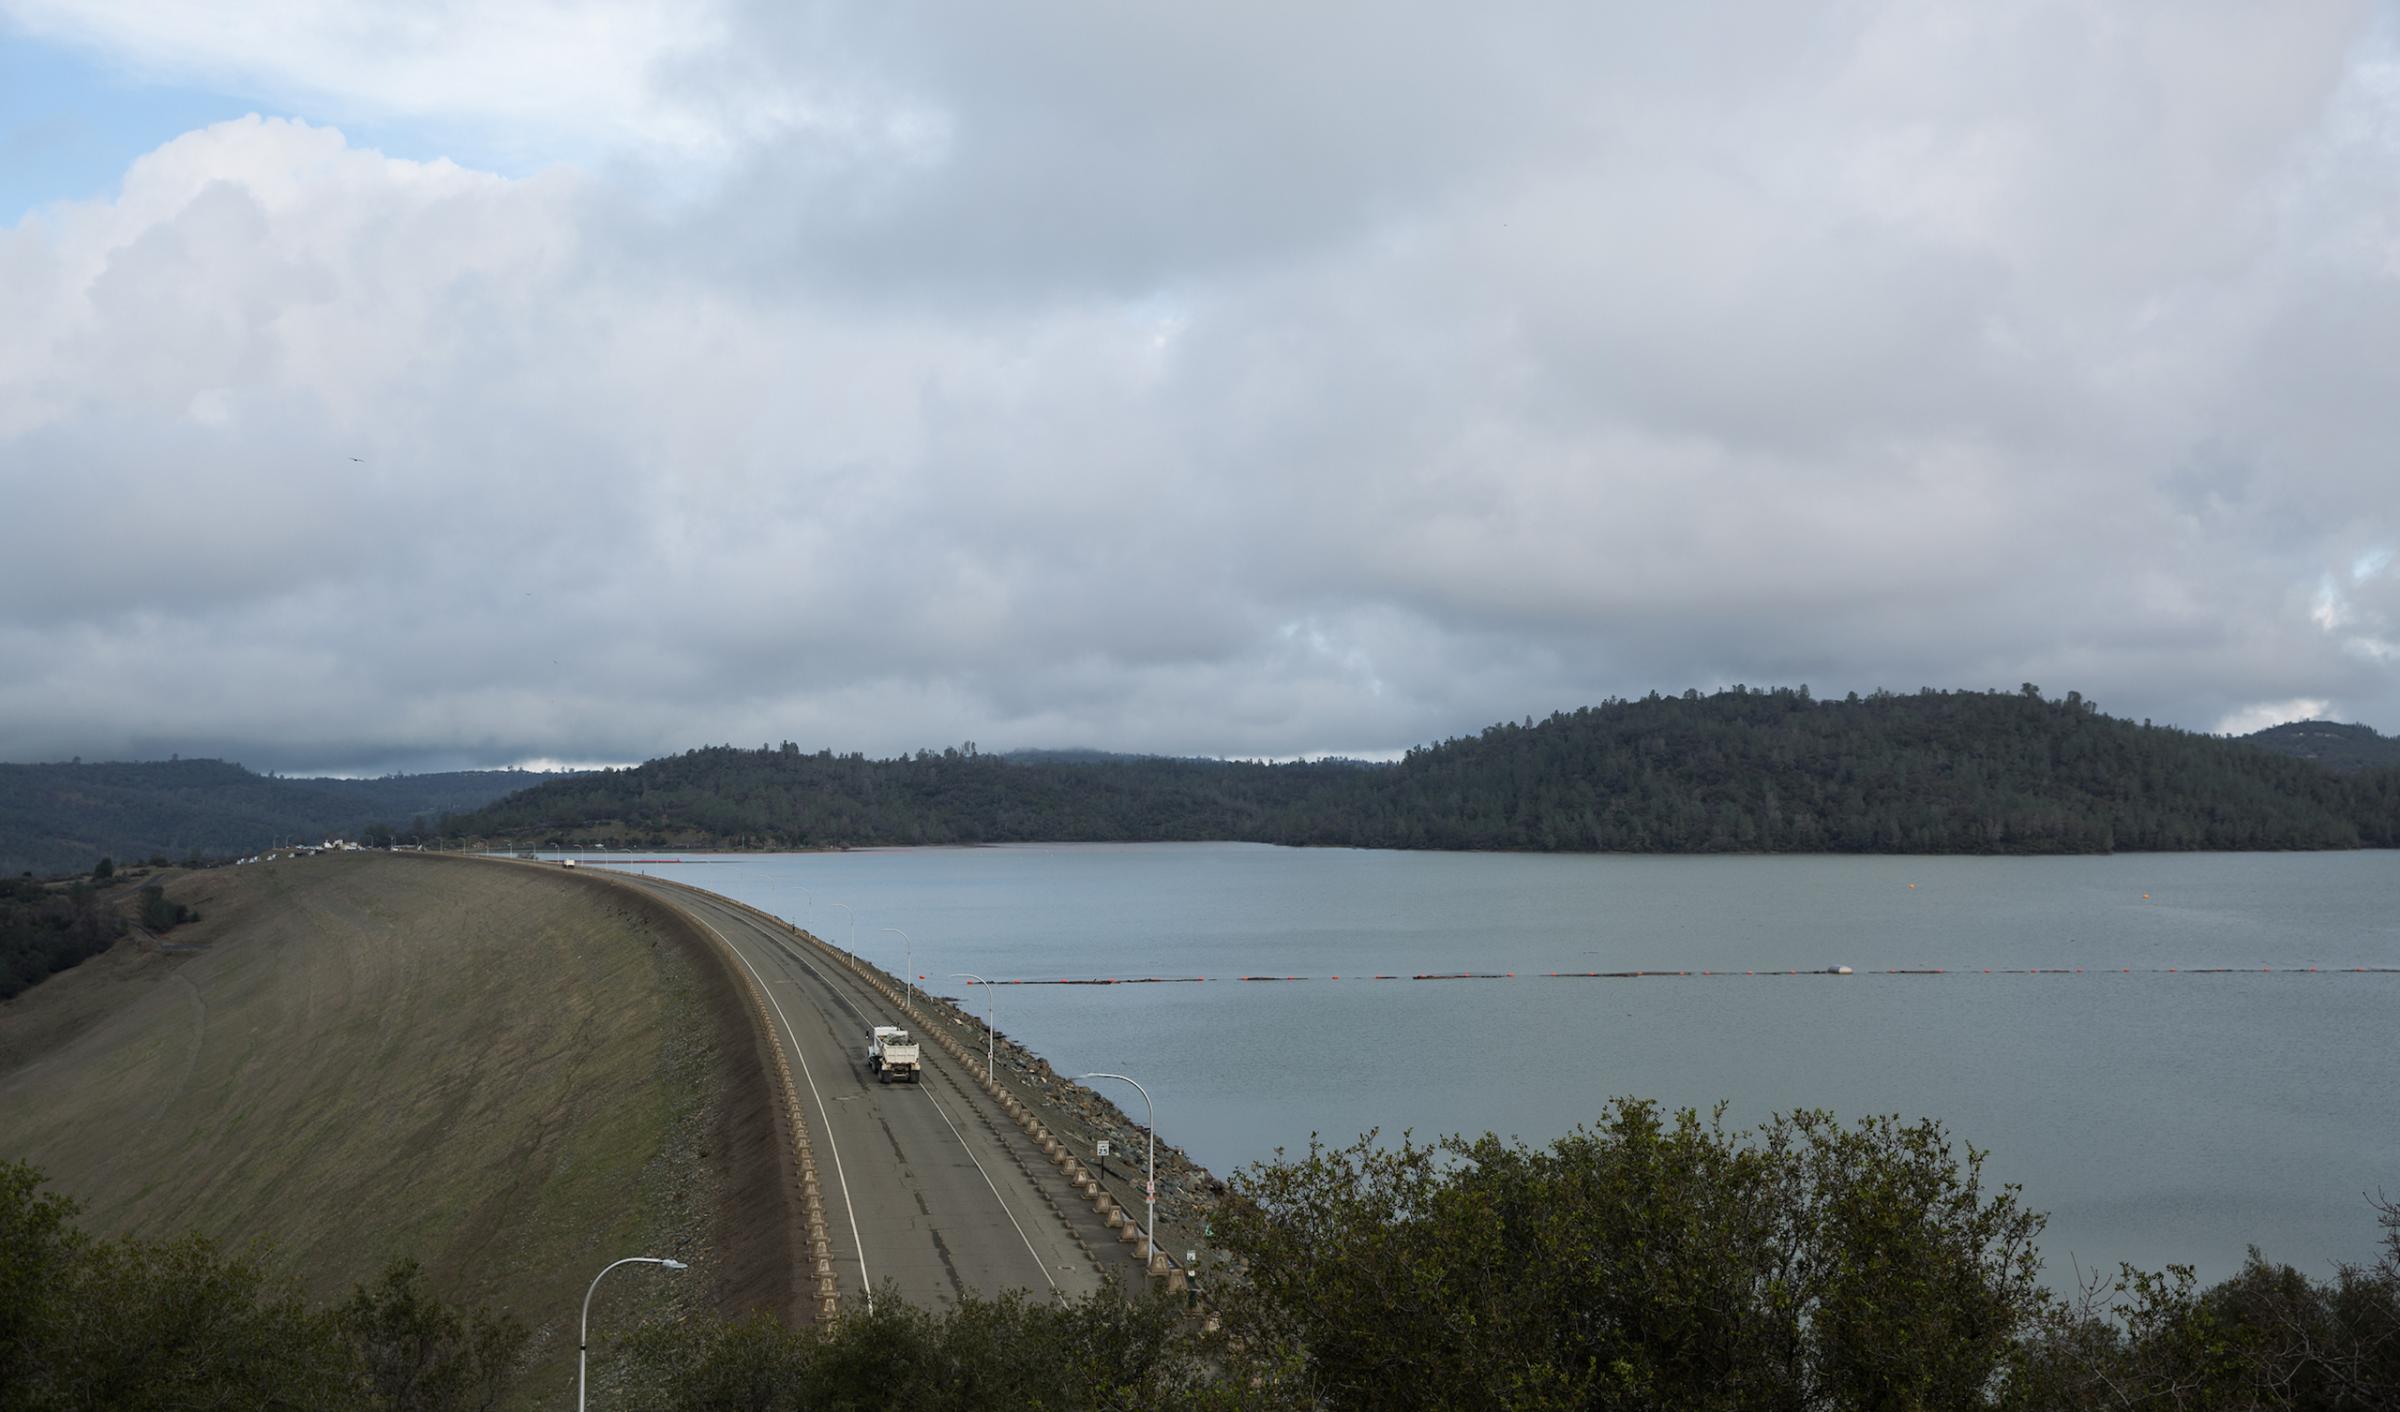 The Oroville reservoir level sits very close to the top of Oroville Dam in Oroville, California on Feb. 10, 2017.